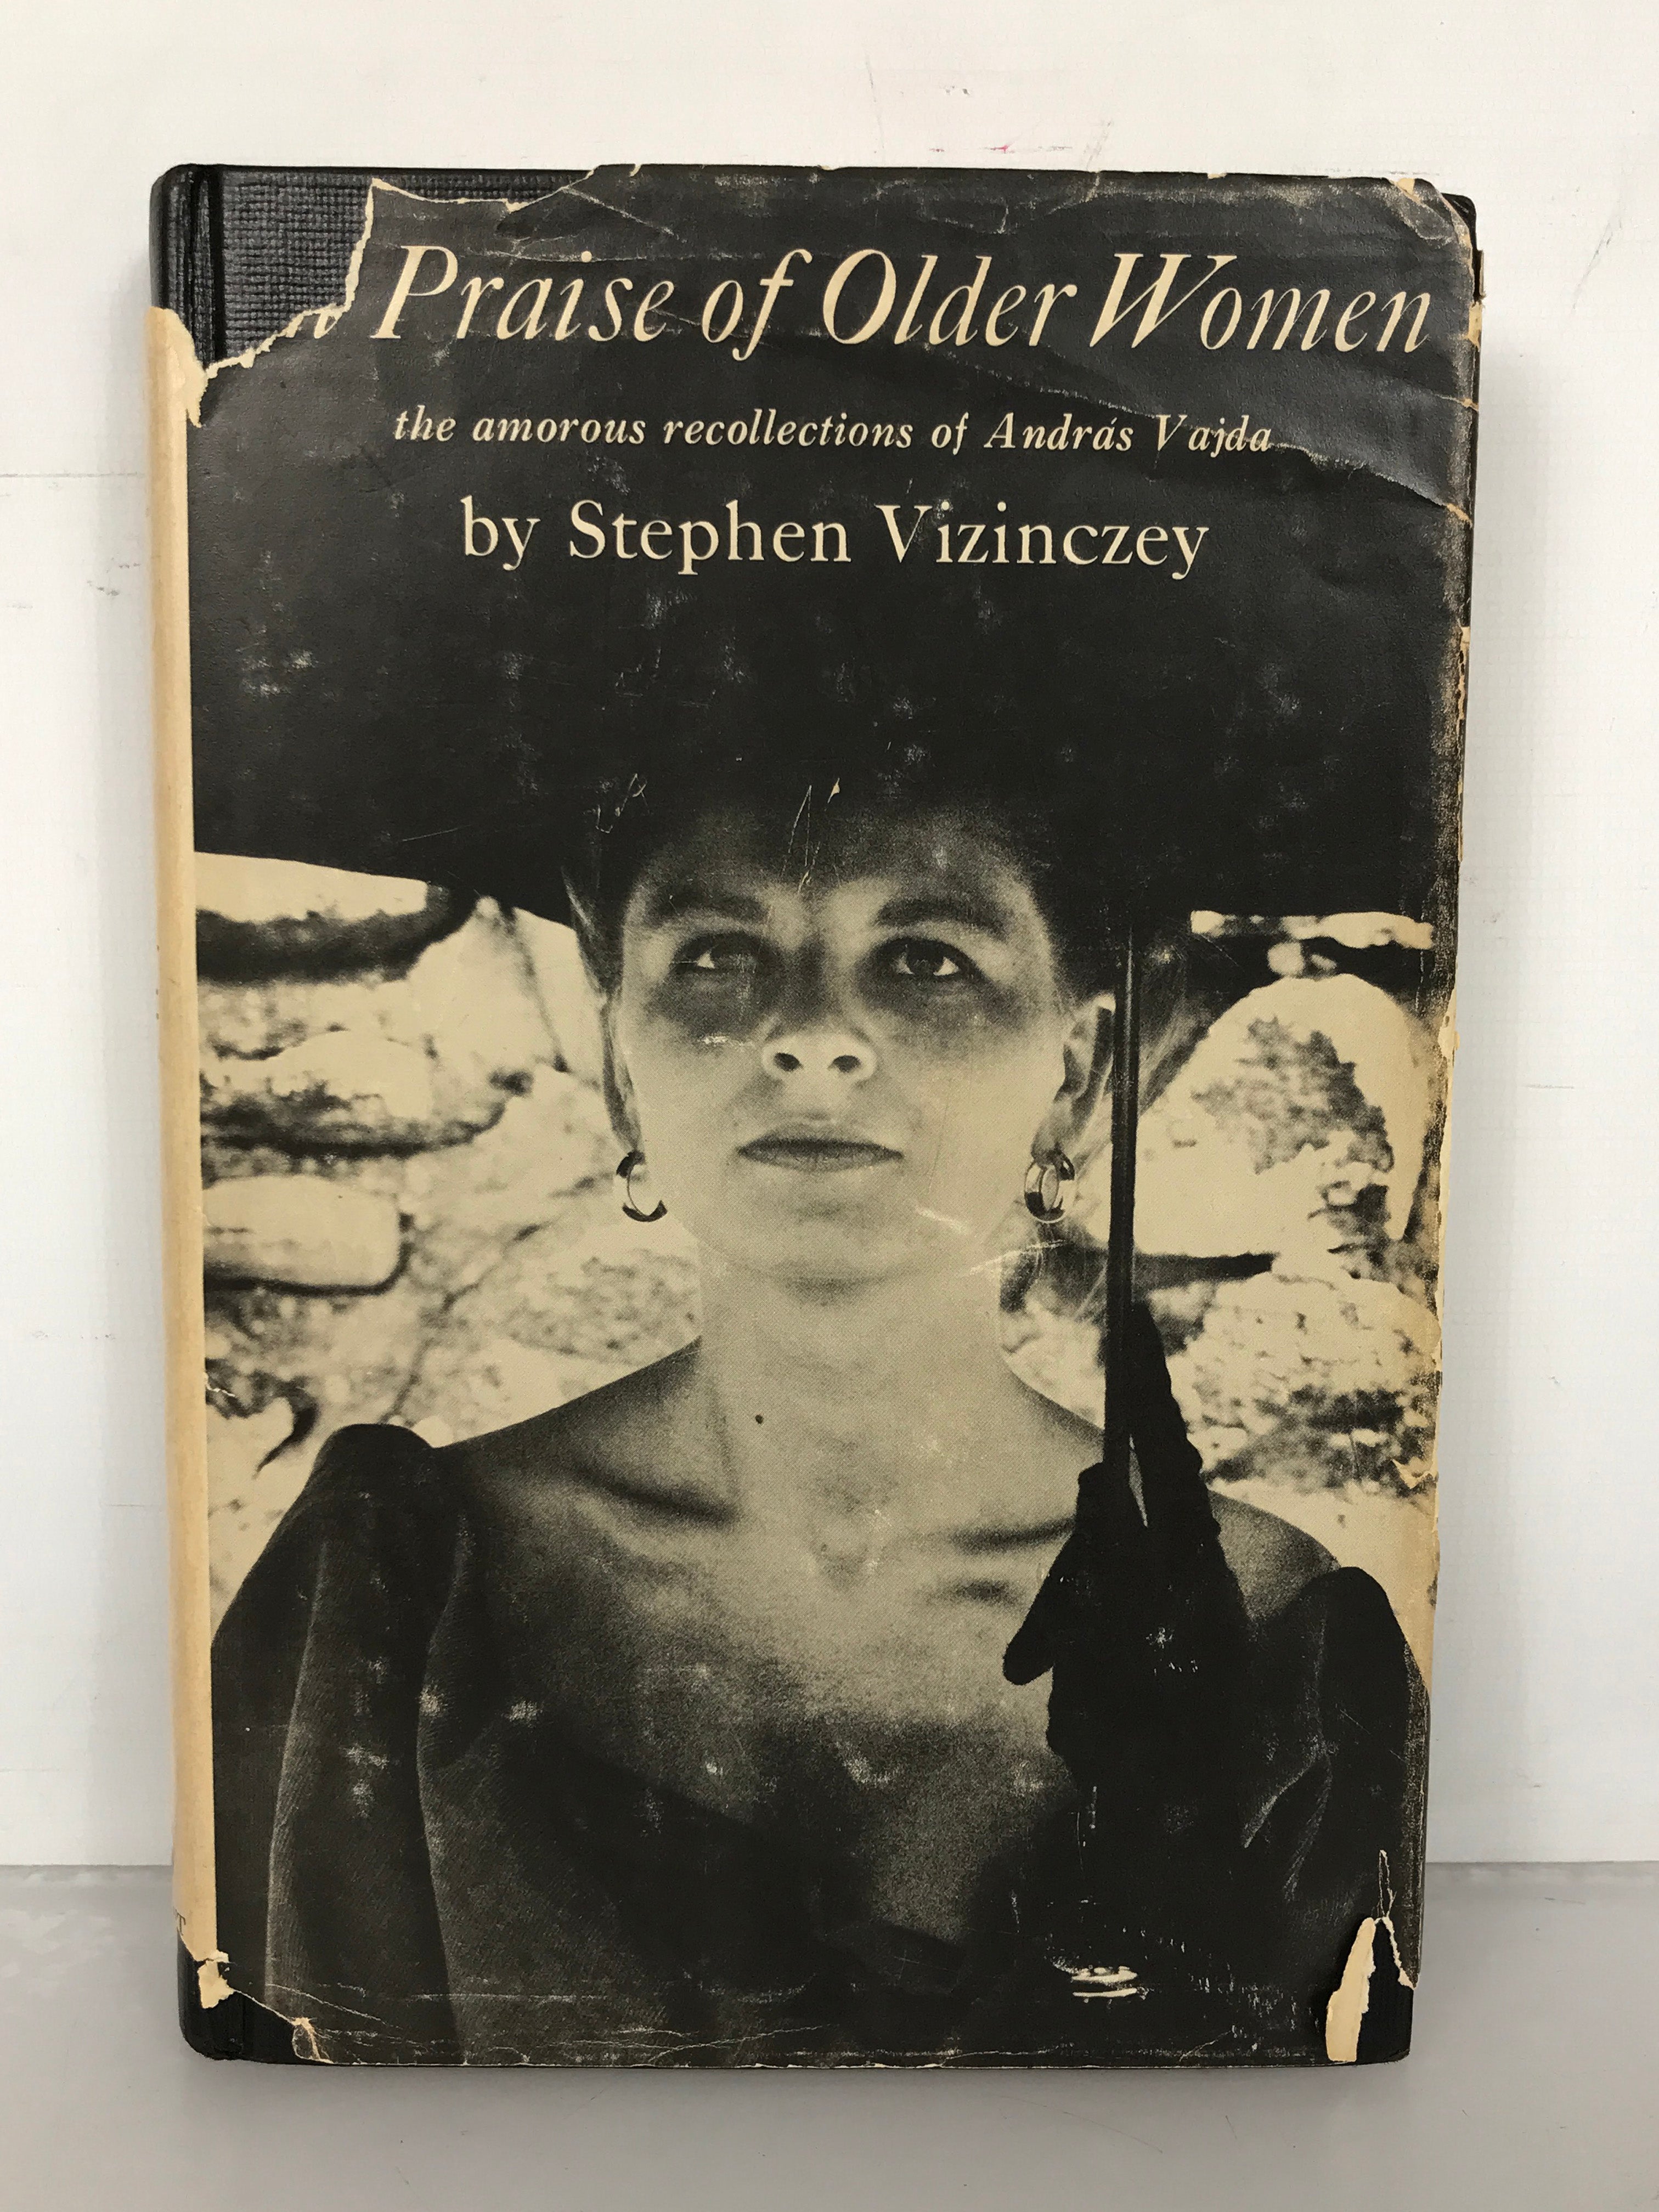 In Praise of Older Women Vizinczey 1966 First Edition Signed by Author